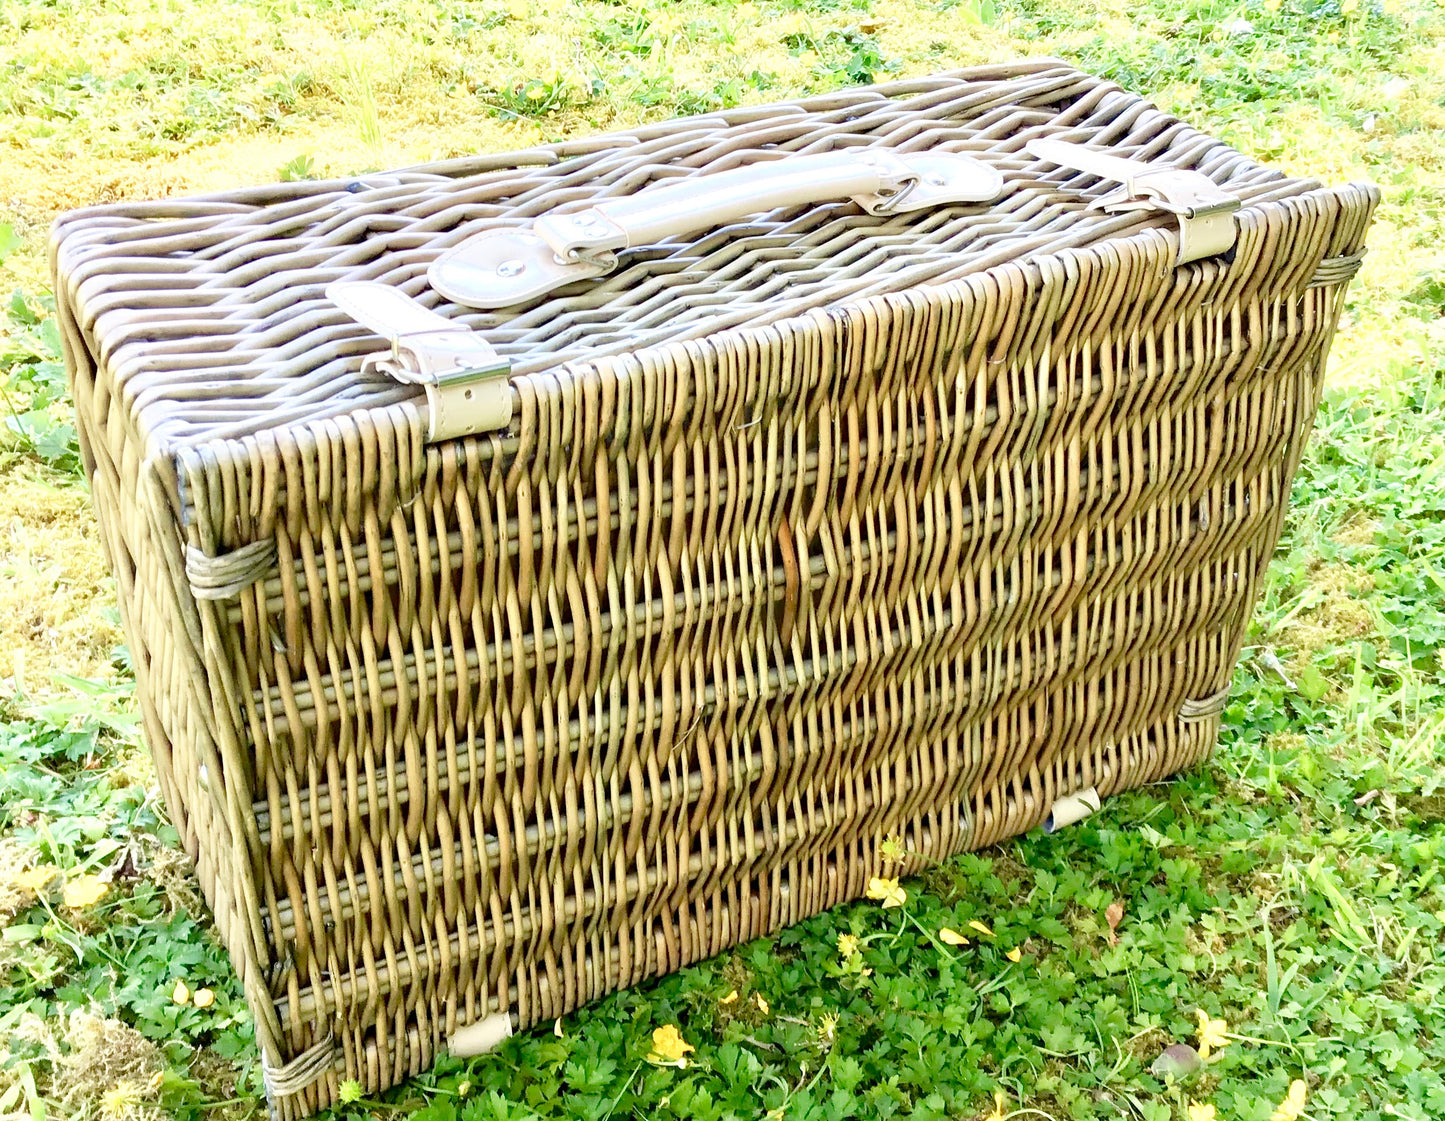 The Seymour - a fitted willow picnic hamper for 4